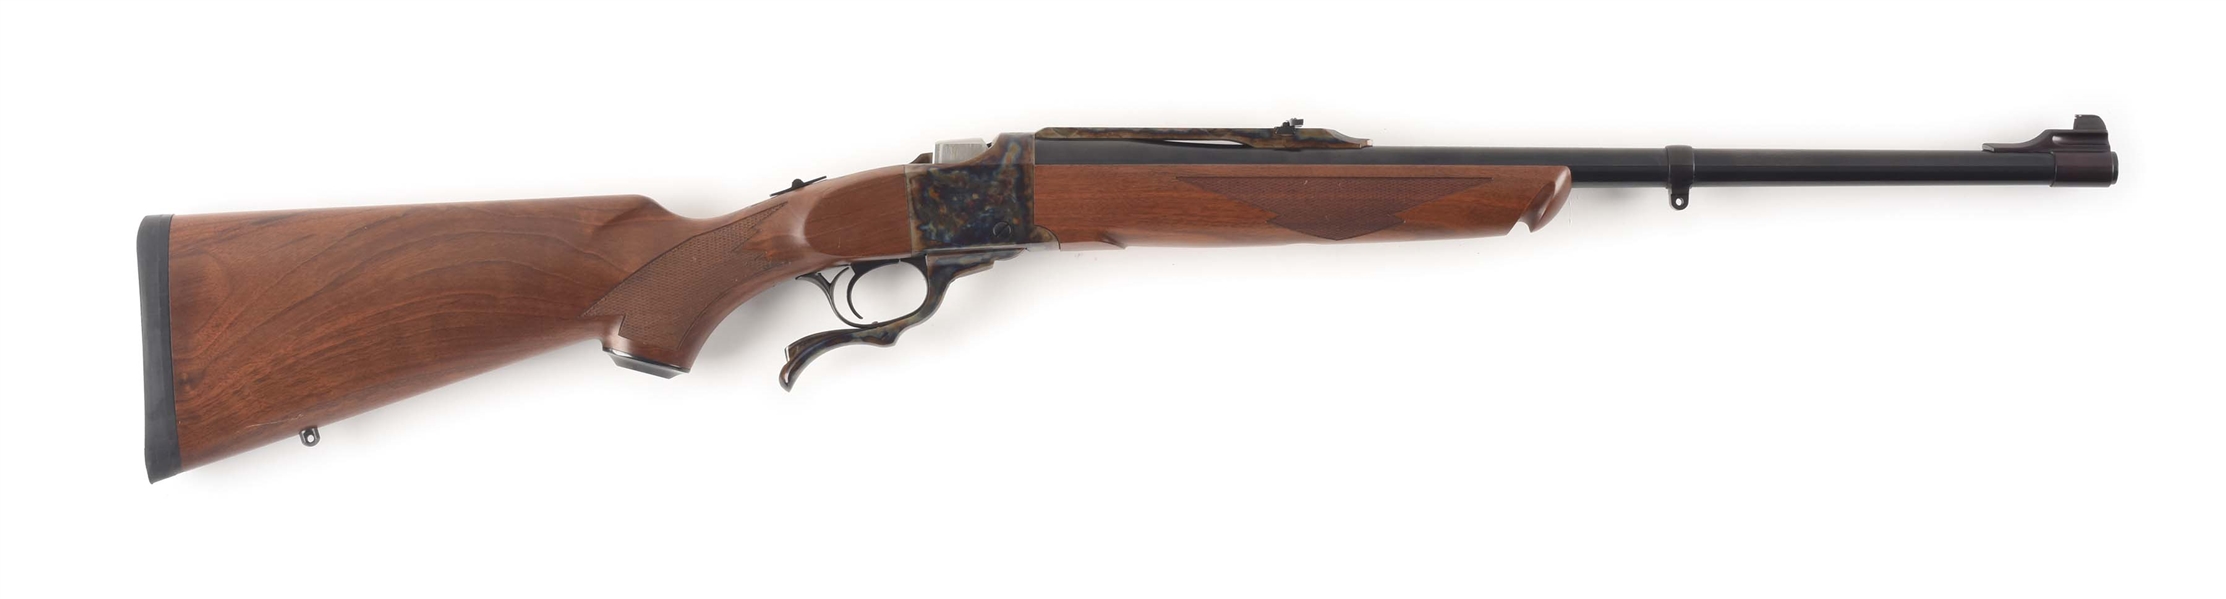 (M) DELUXE CASE COLORED RUGER NO. 1 .45-70 SINGLE SHOT RIFLE.